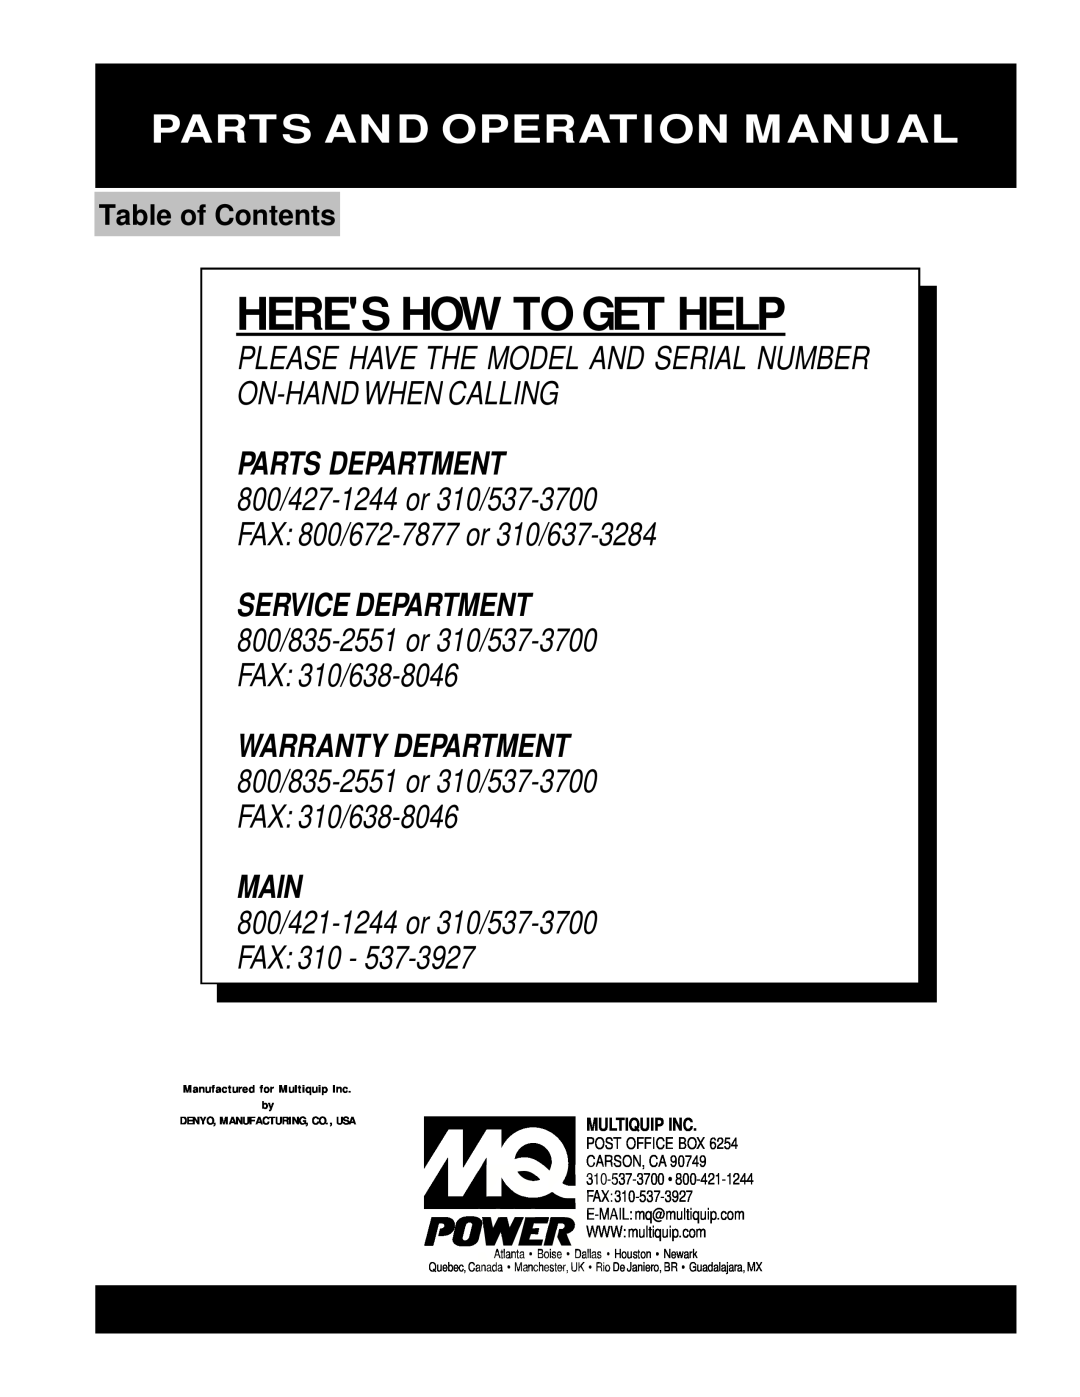 Multiquip DCA-150SSKII 800/421-1244 or 310/537-3700 FAX 310, Heres How To Get Help, Parts And Operation Manual, Main 